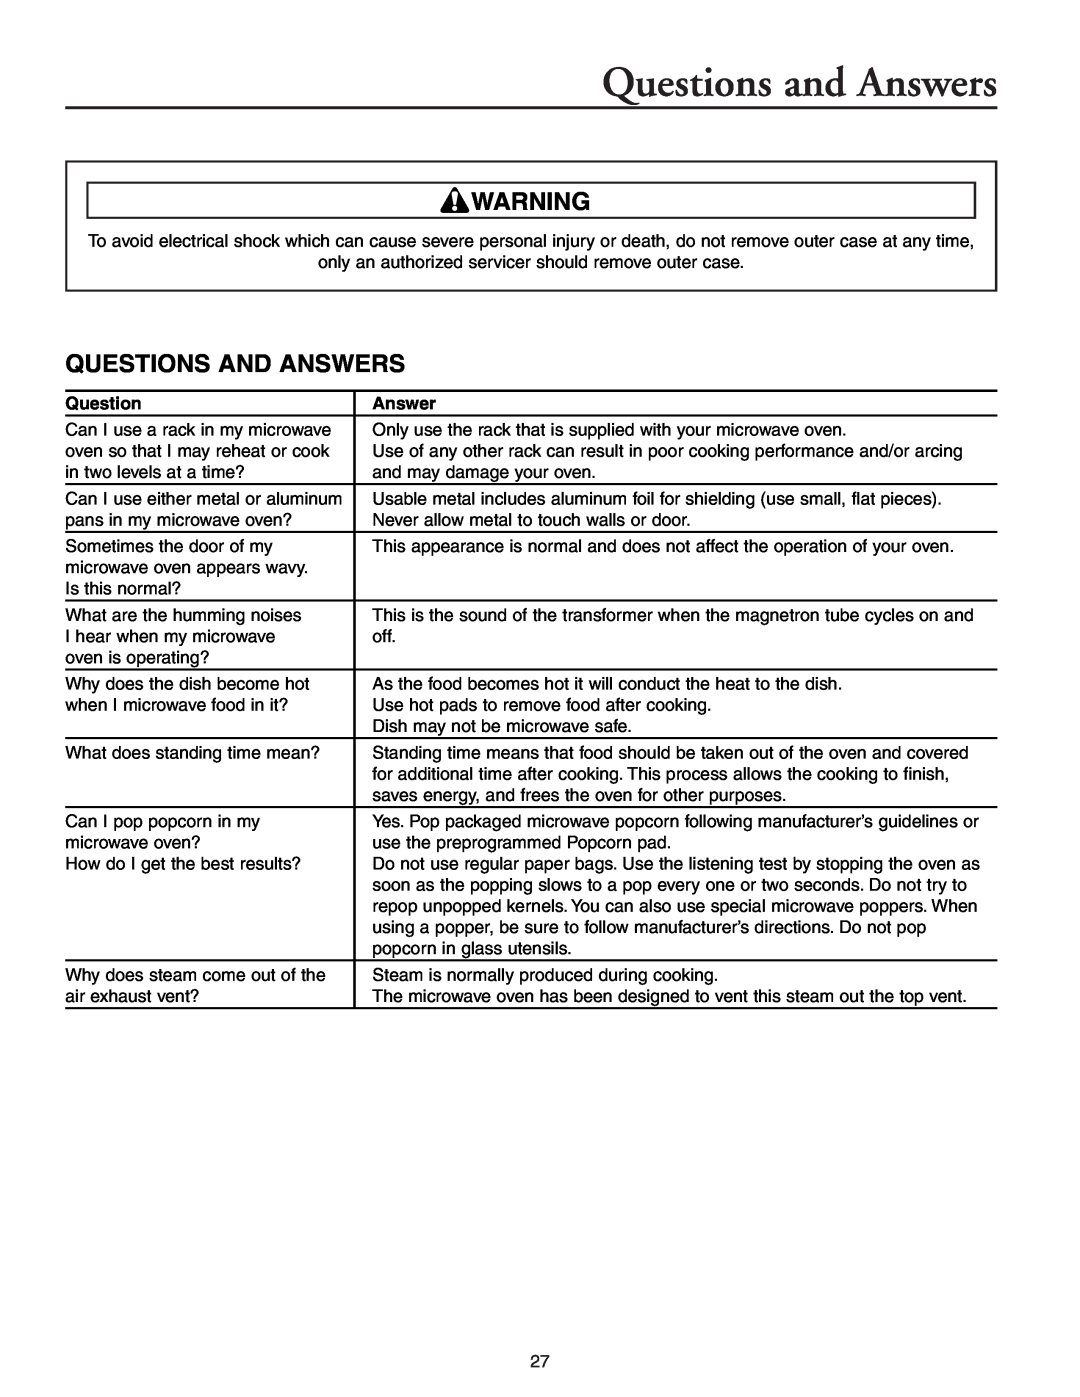 Maytag MMV51566AA/MMV5156AC owner manual Questions and Answers, Questions And Answers 